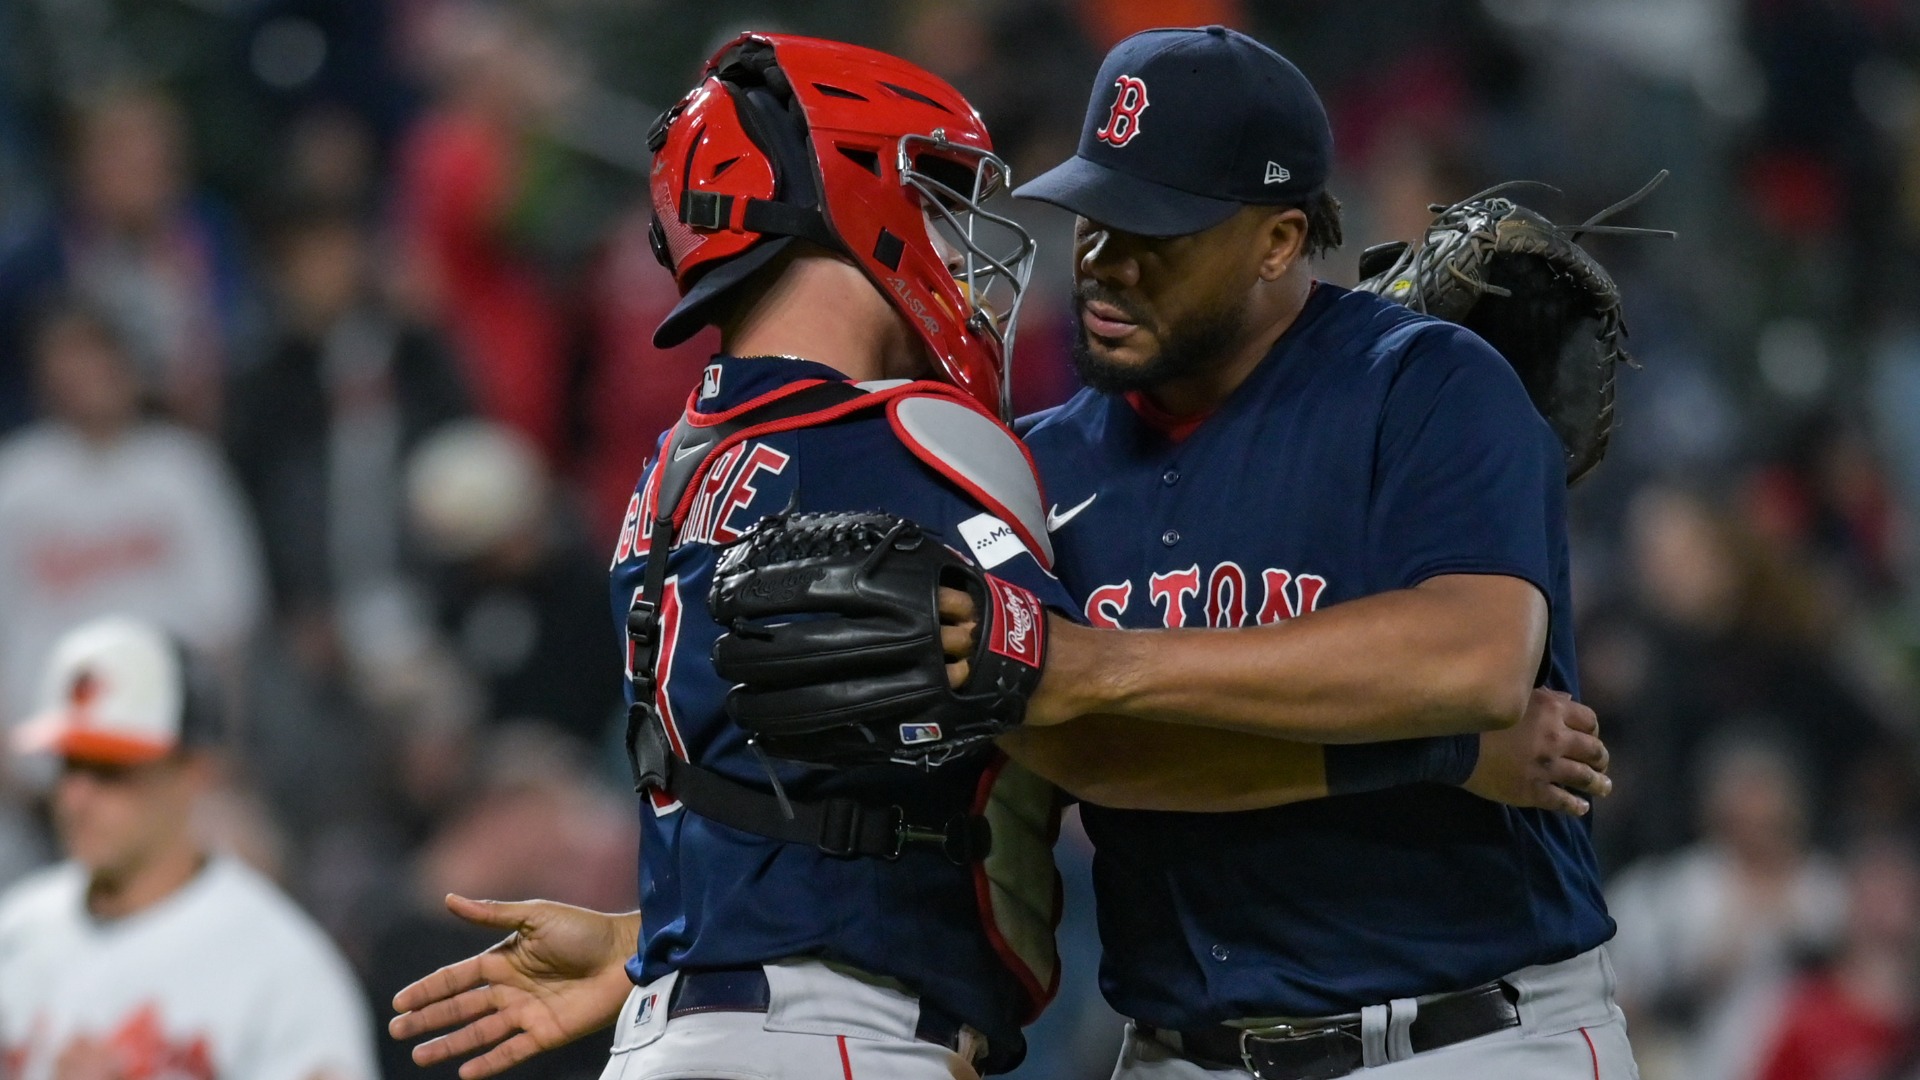 MLB roundup: Red Sox's Kenley Jansen notches 400th save